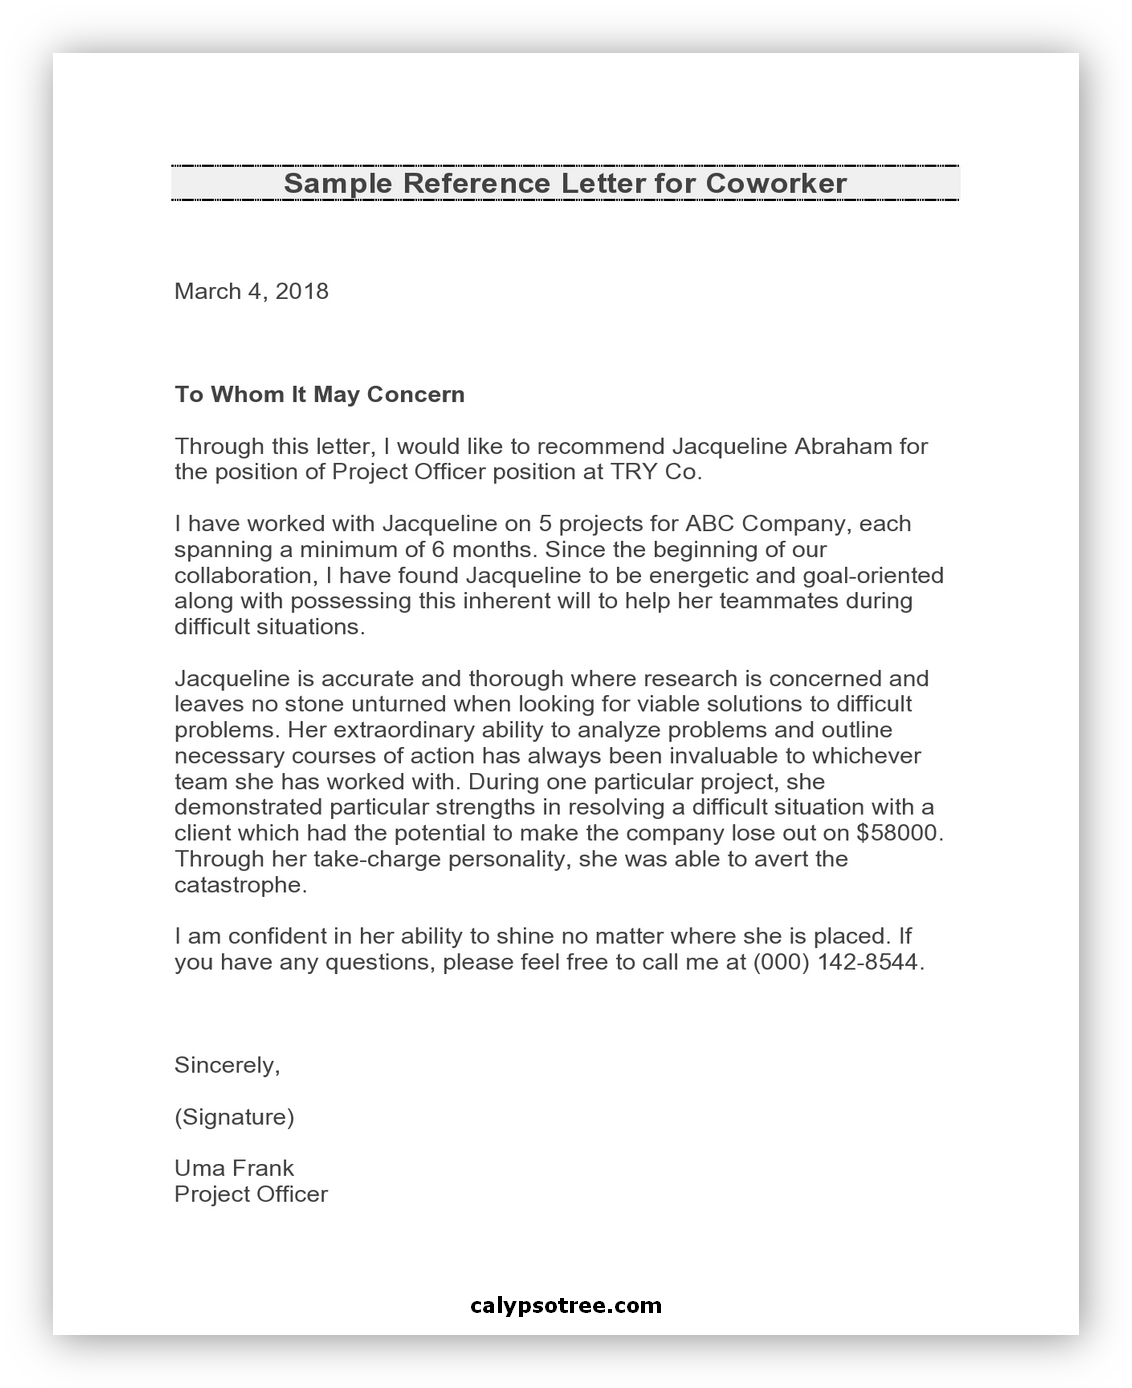 Letter of Recommendation for Coworker 05